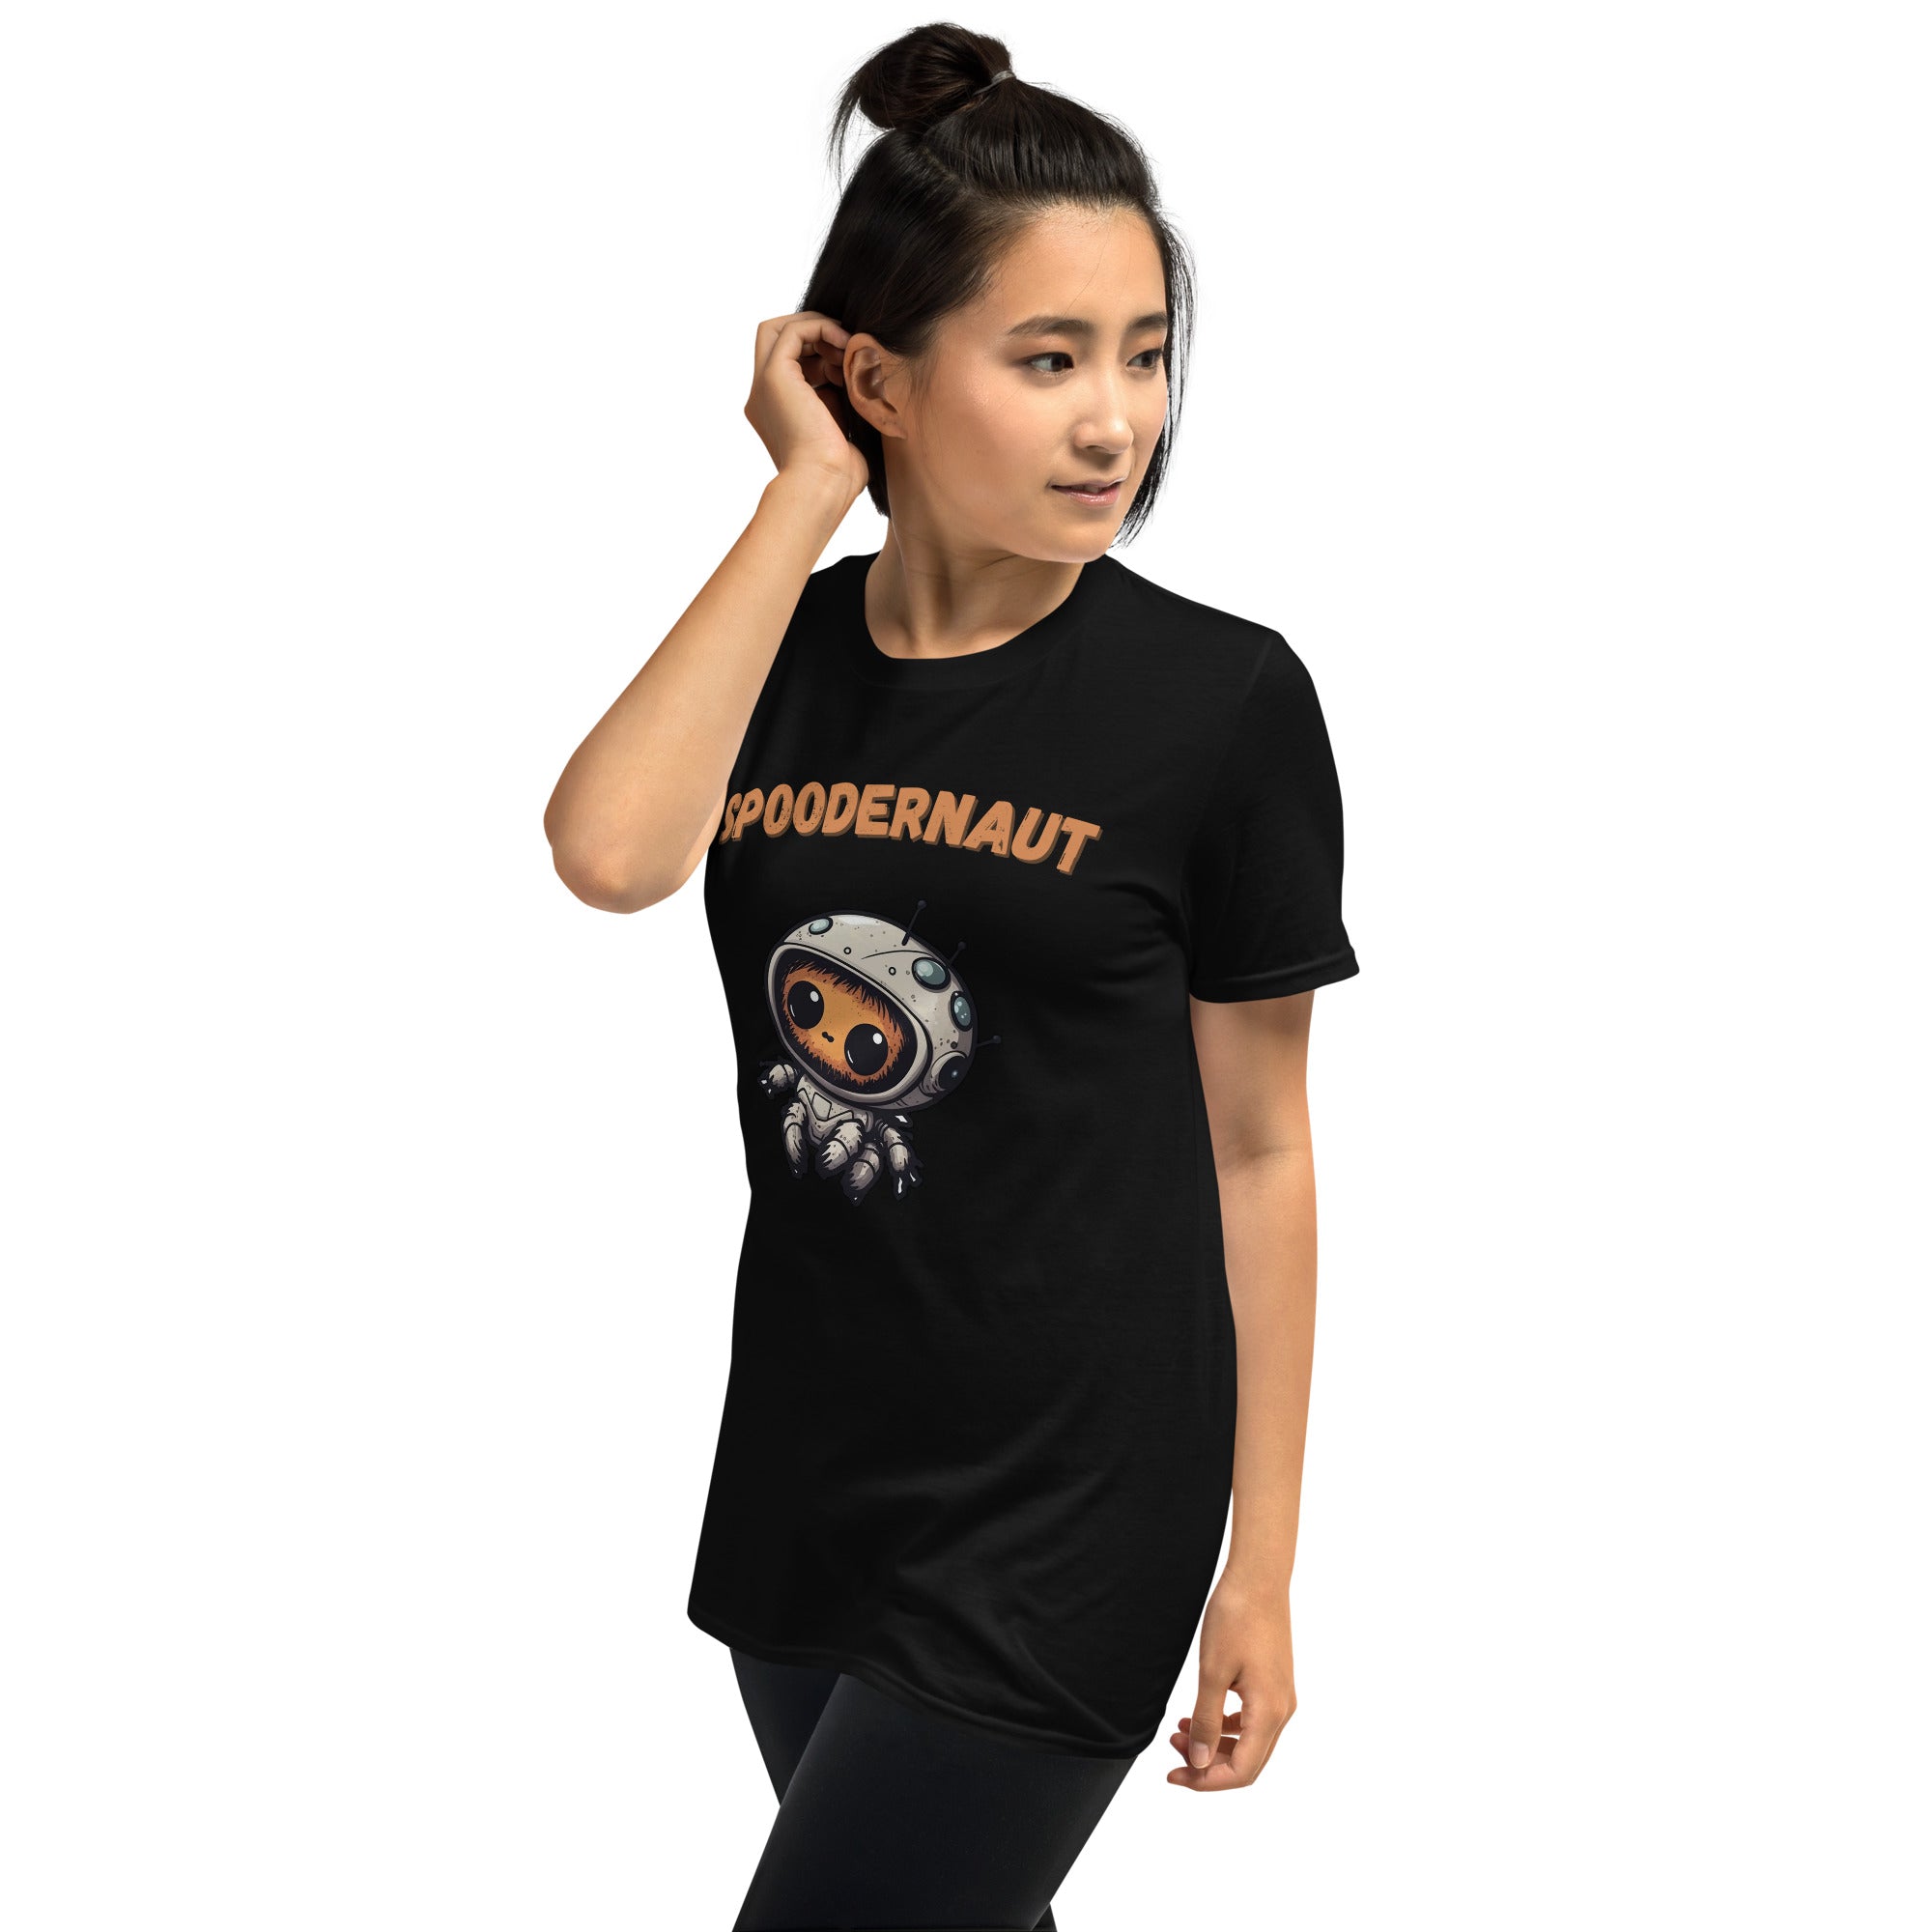 Spoodernaut Short-Sleeve Women's T-Shirt - Jumping Spiders For Sale - Spiders Source - #1 Regal Jumping Spider Store